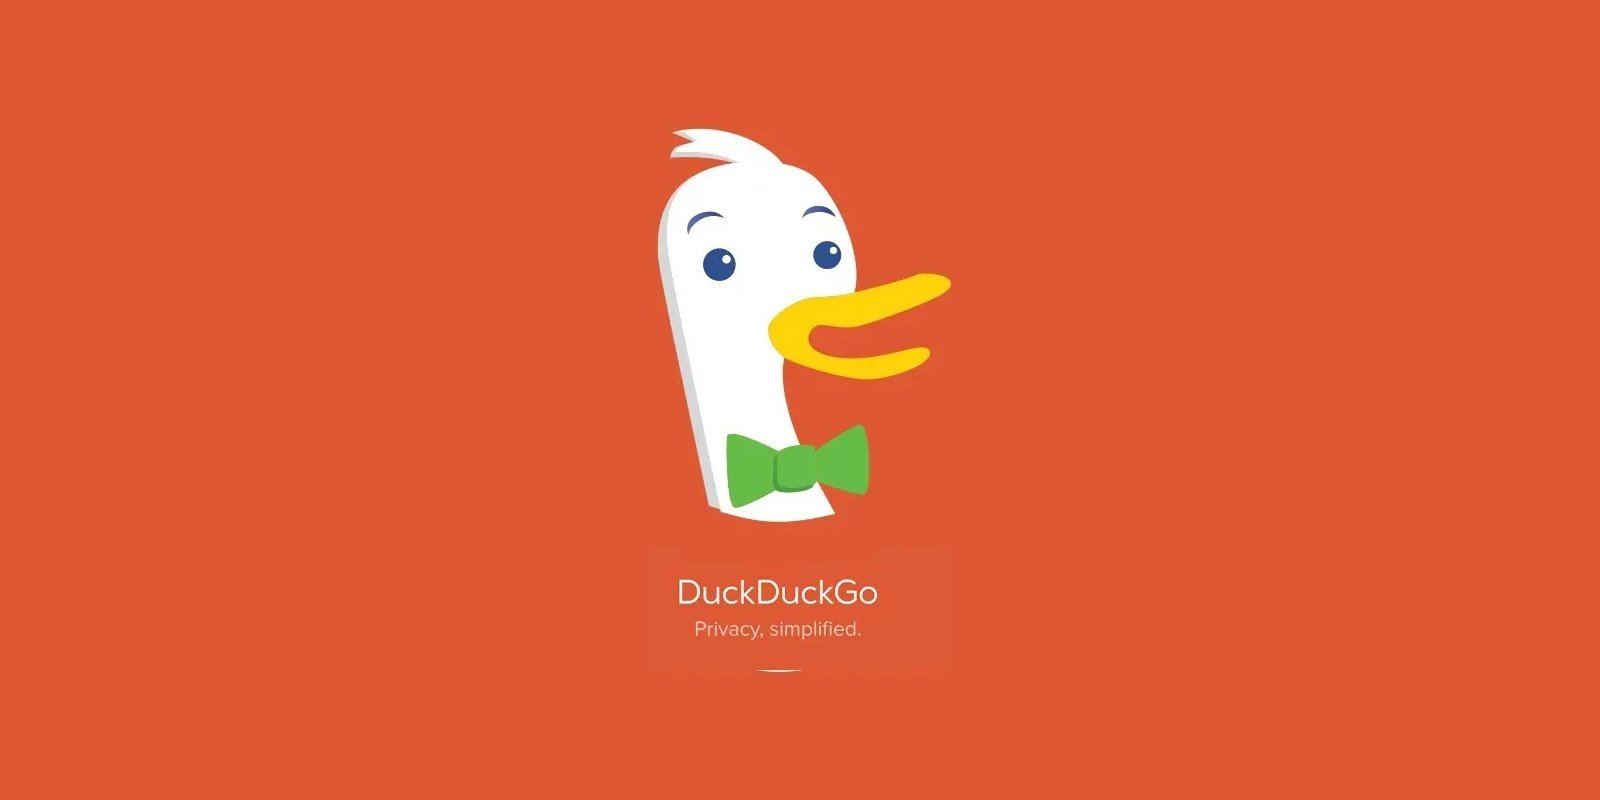 Privacy-focused search engine DuckDuckGo grew by 62% in 2020